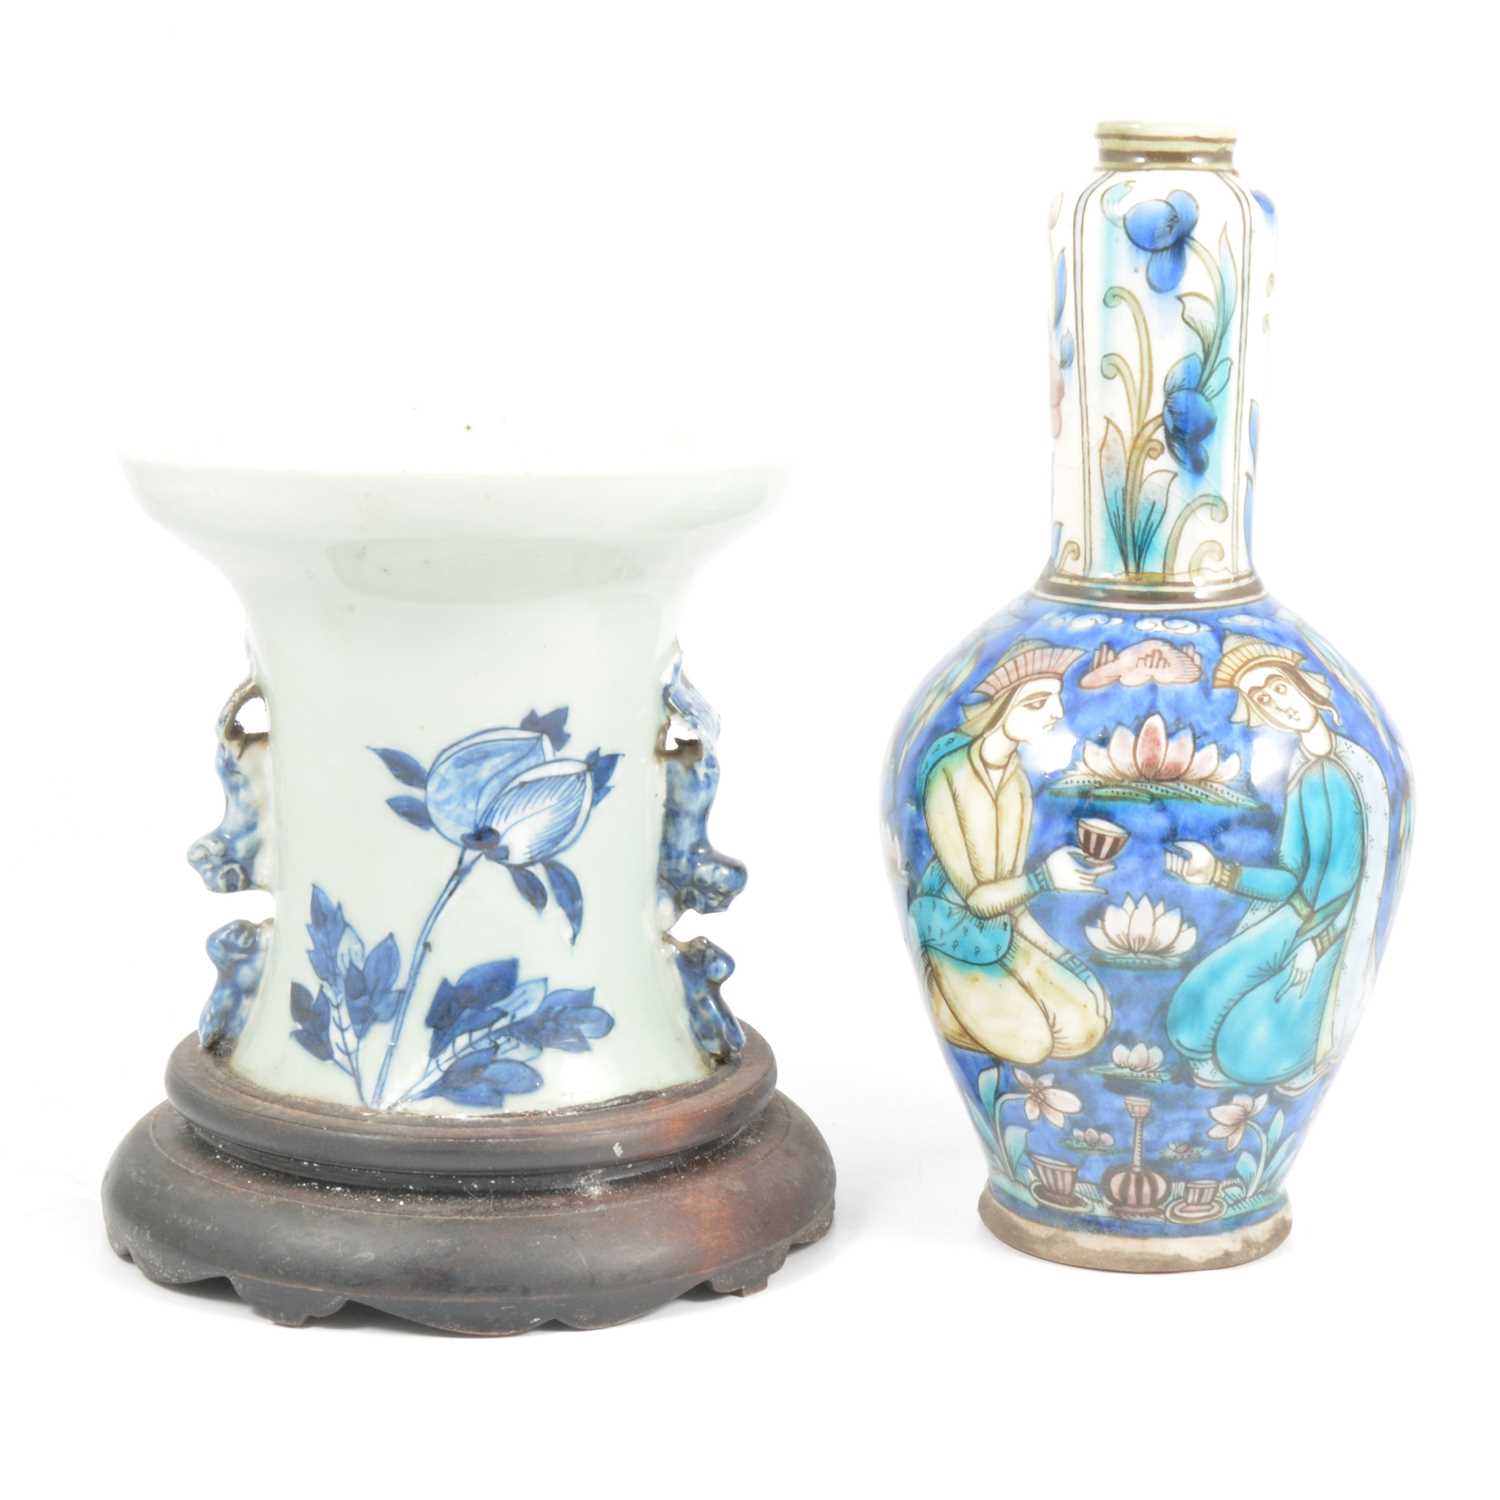 Persian pottery vase and a Chinese porcelain jardiniere converted from a vase